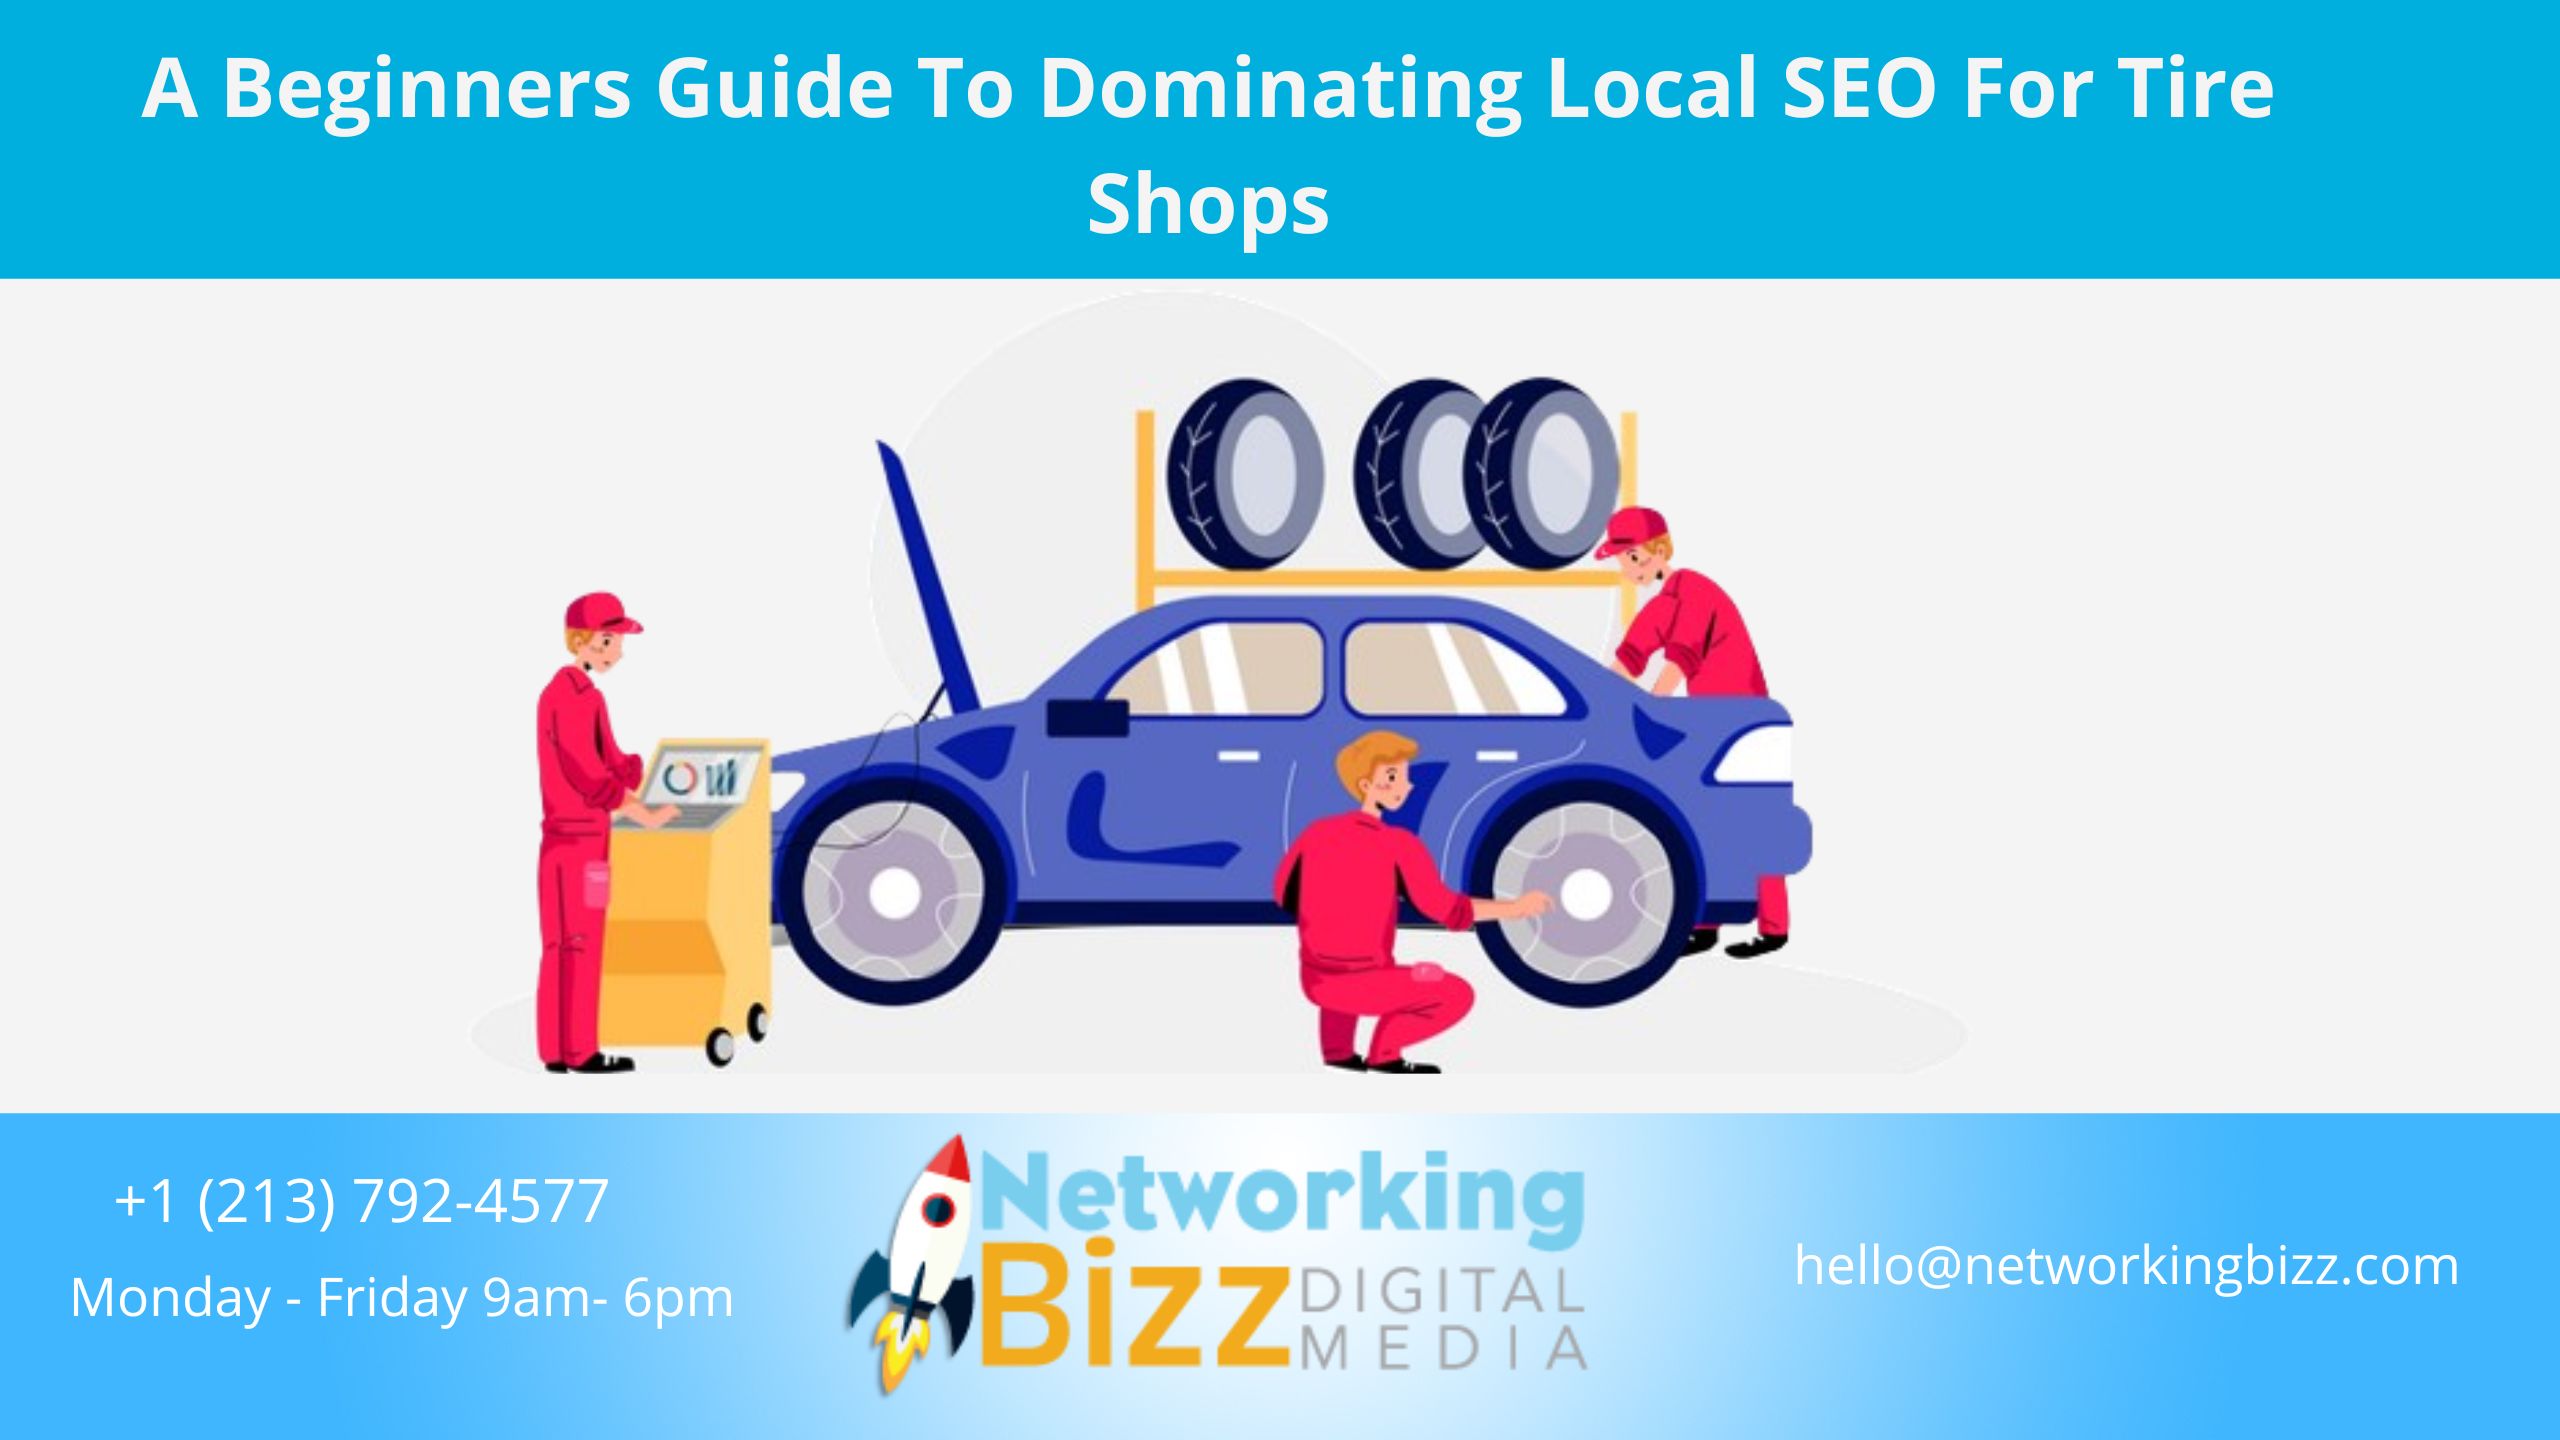 A Beginners Guide To Dominating Local SEO For Tire Shops